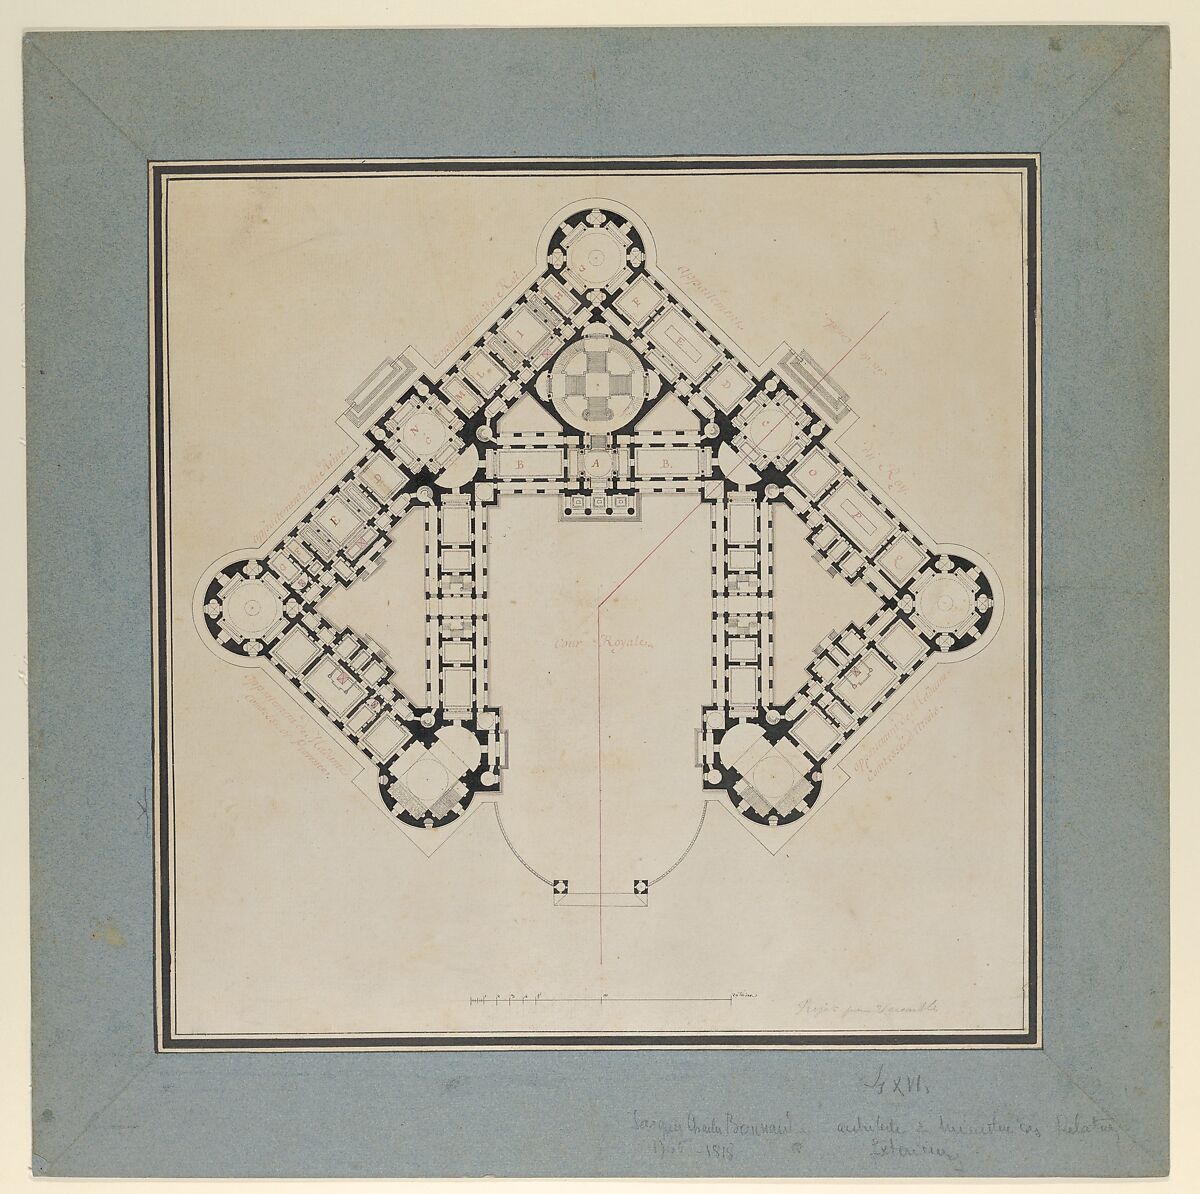 Floor Plan for the Renovations of the Château de Rambouillet, Jean Augustin Renard (French, 1744–1807), Pen and black ink, brush and pink, black, and gray wash 